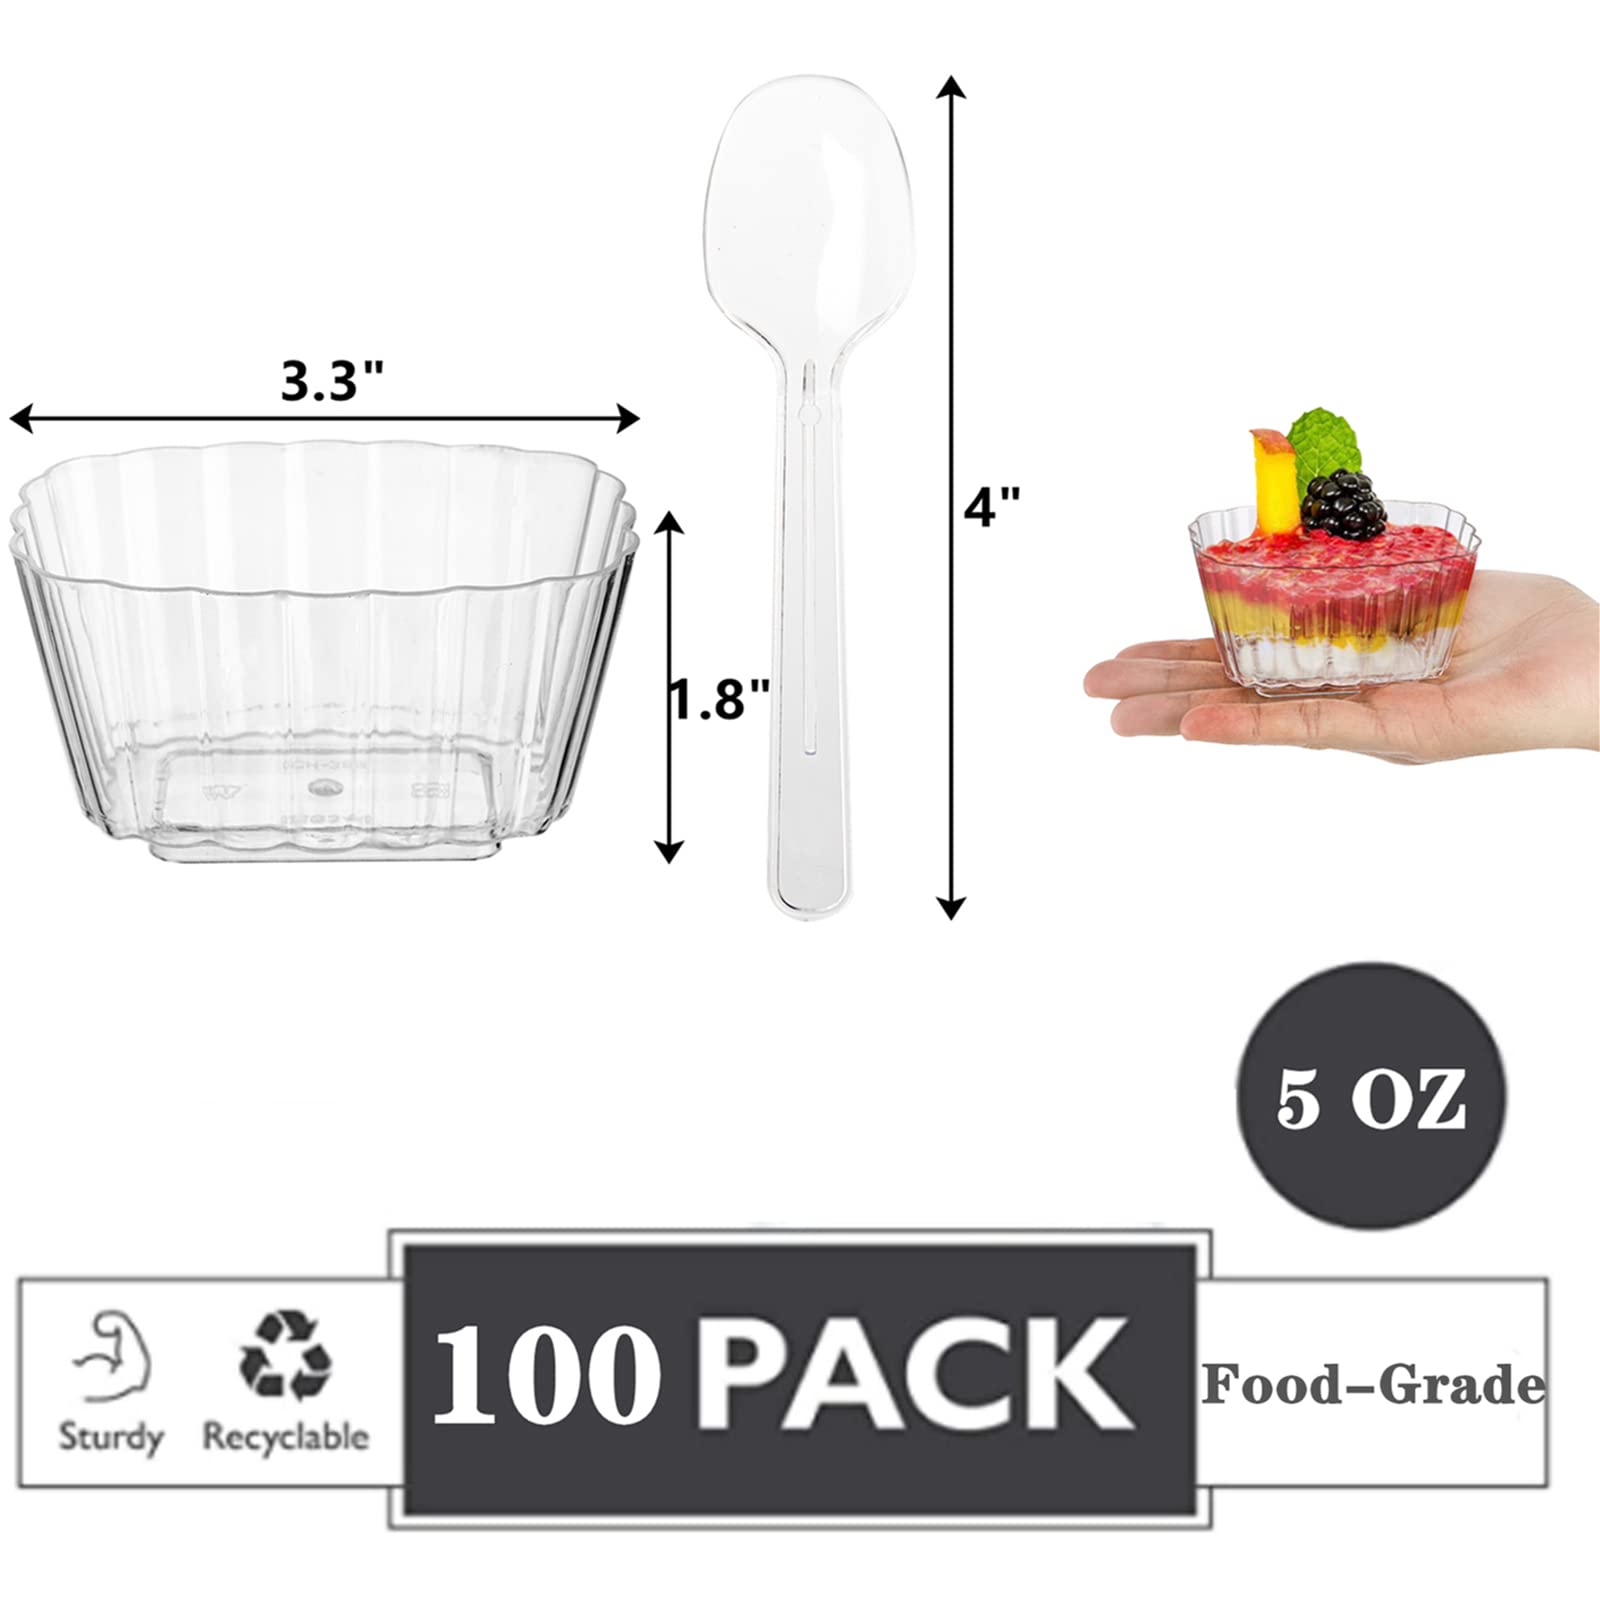 DEAYOU 100 Pack 5 Oz Dessert Cups with Spoons, Small Plastic Mousse Cup Dessert Shooters, Clear Disposable Parfait Appetizer Cup, Mini Reusable Trifle Tumbler Cup for Souffle, Pudding, Party